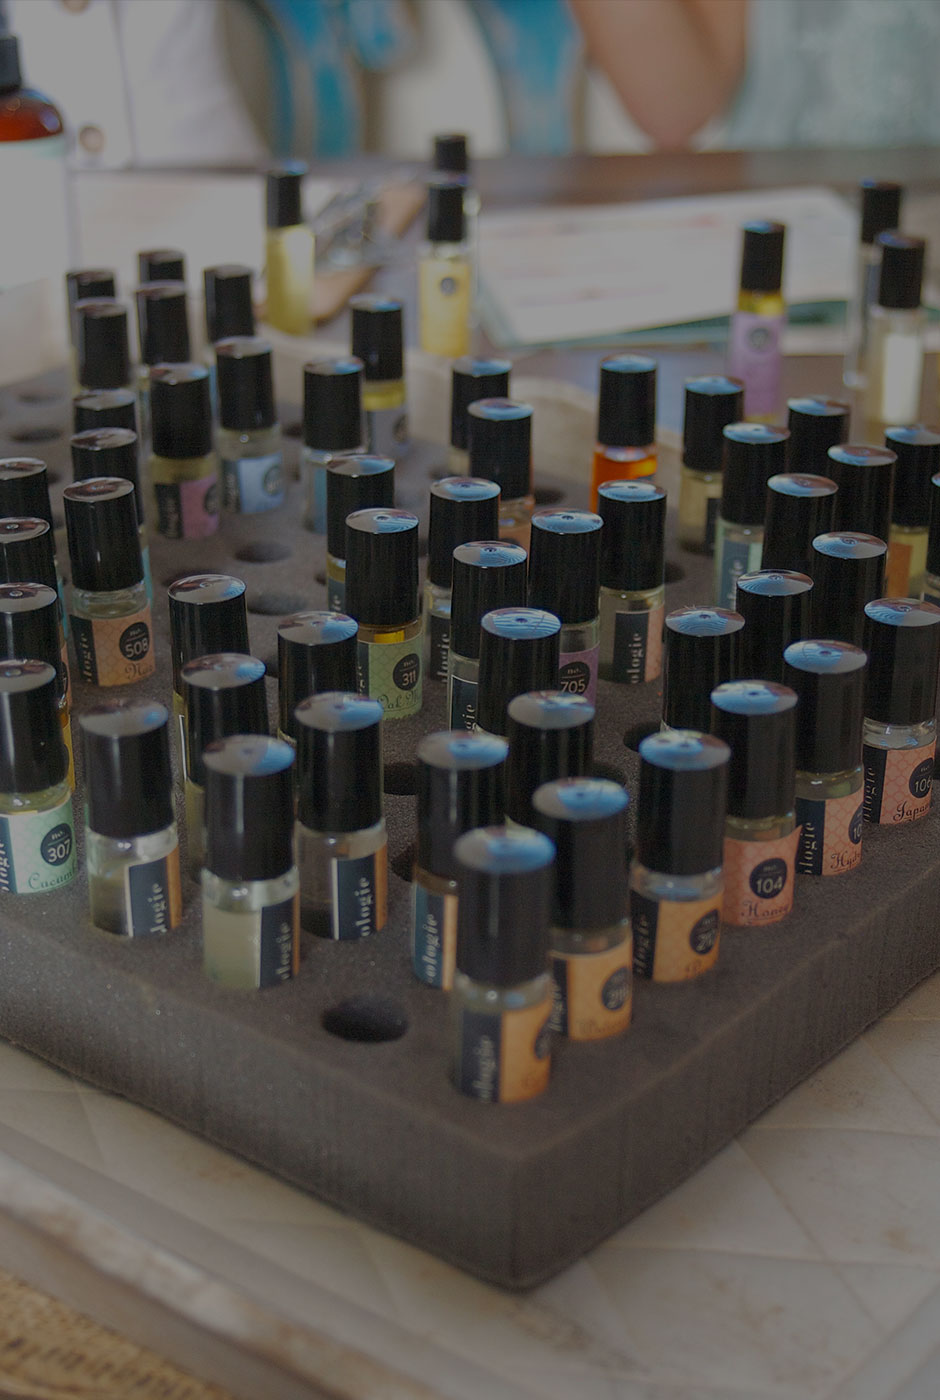 A colorful tray of bathologie scented oils.